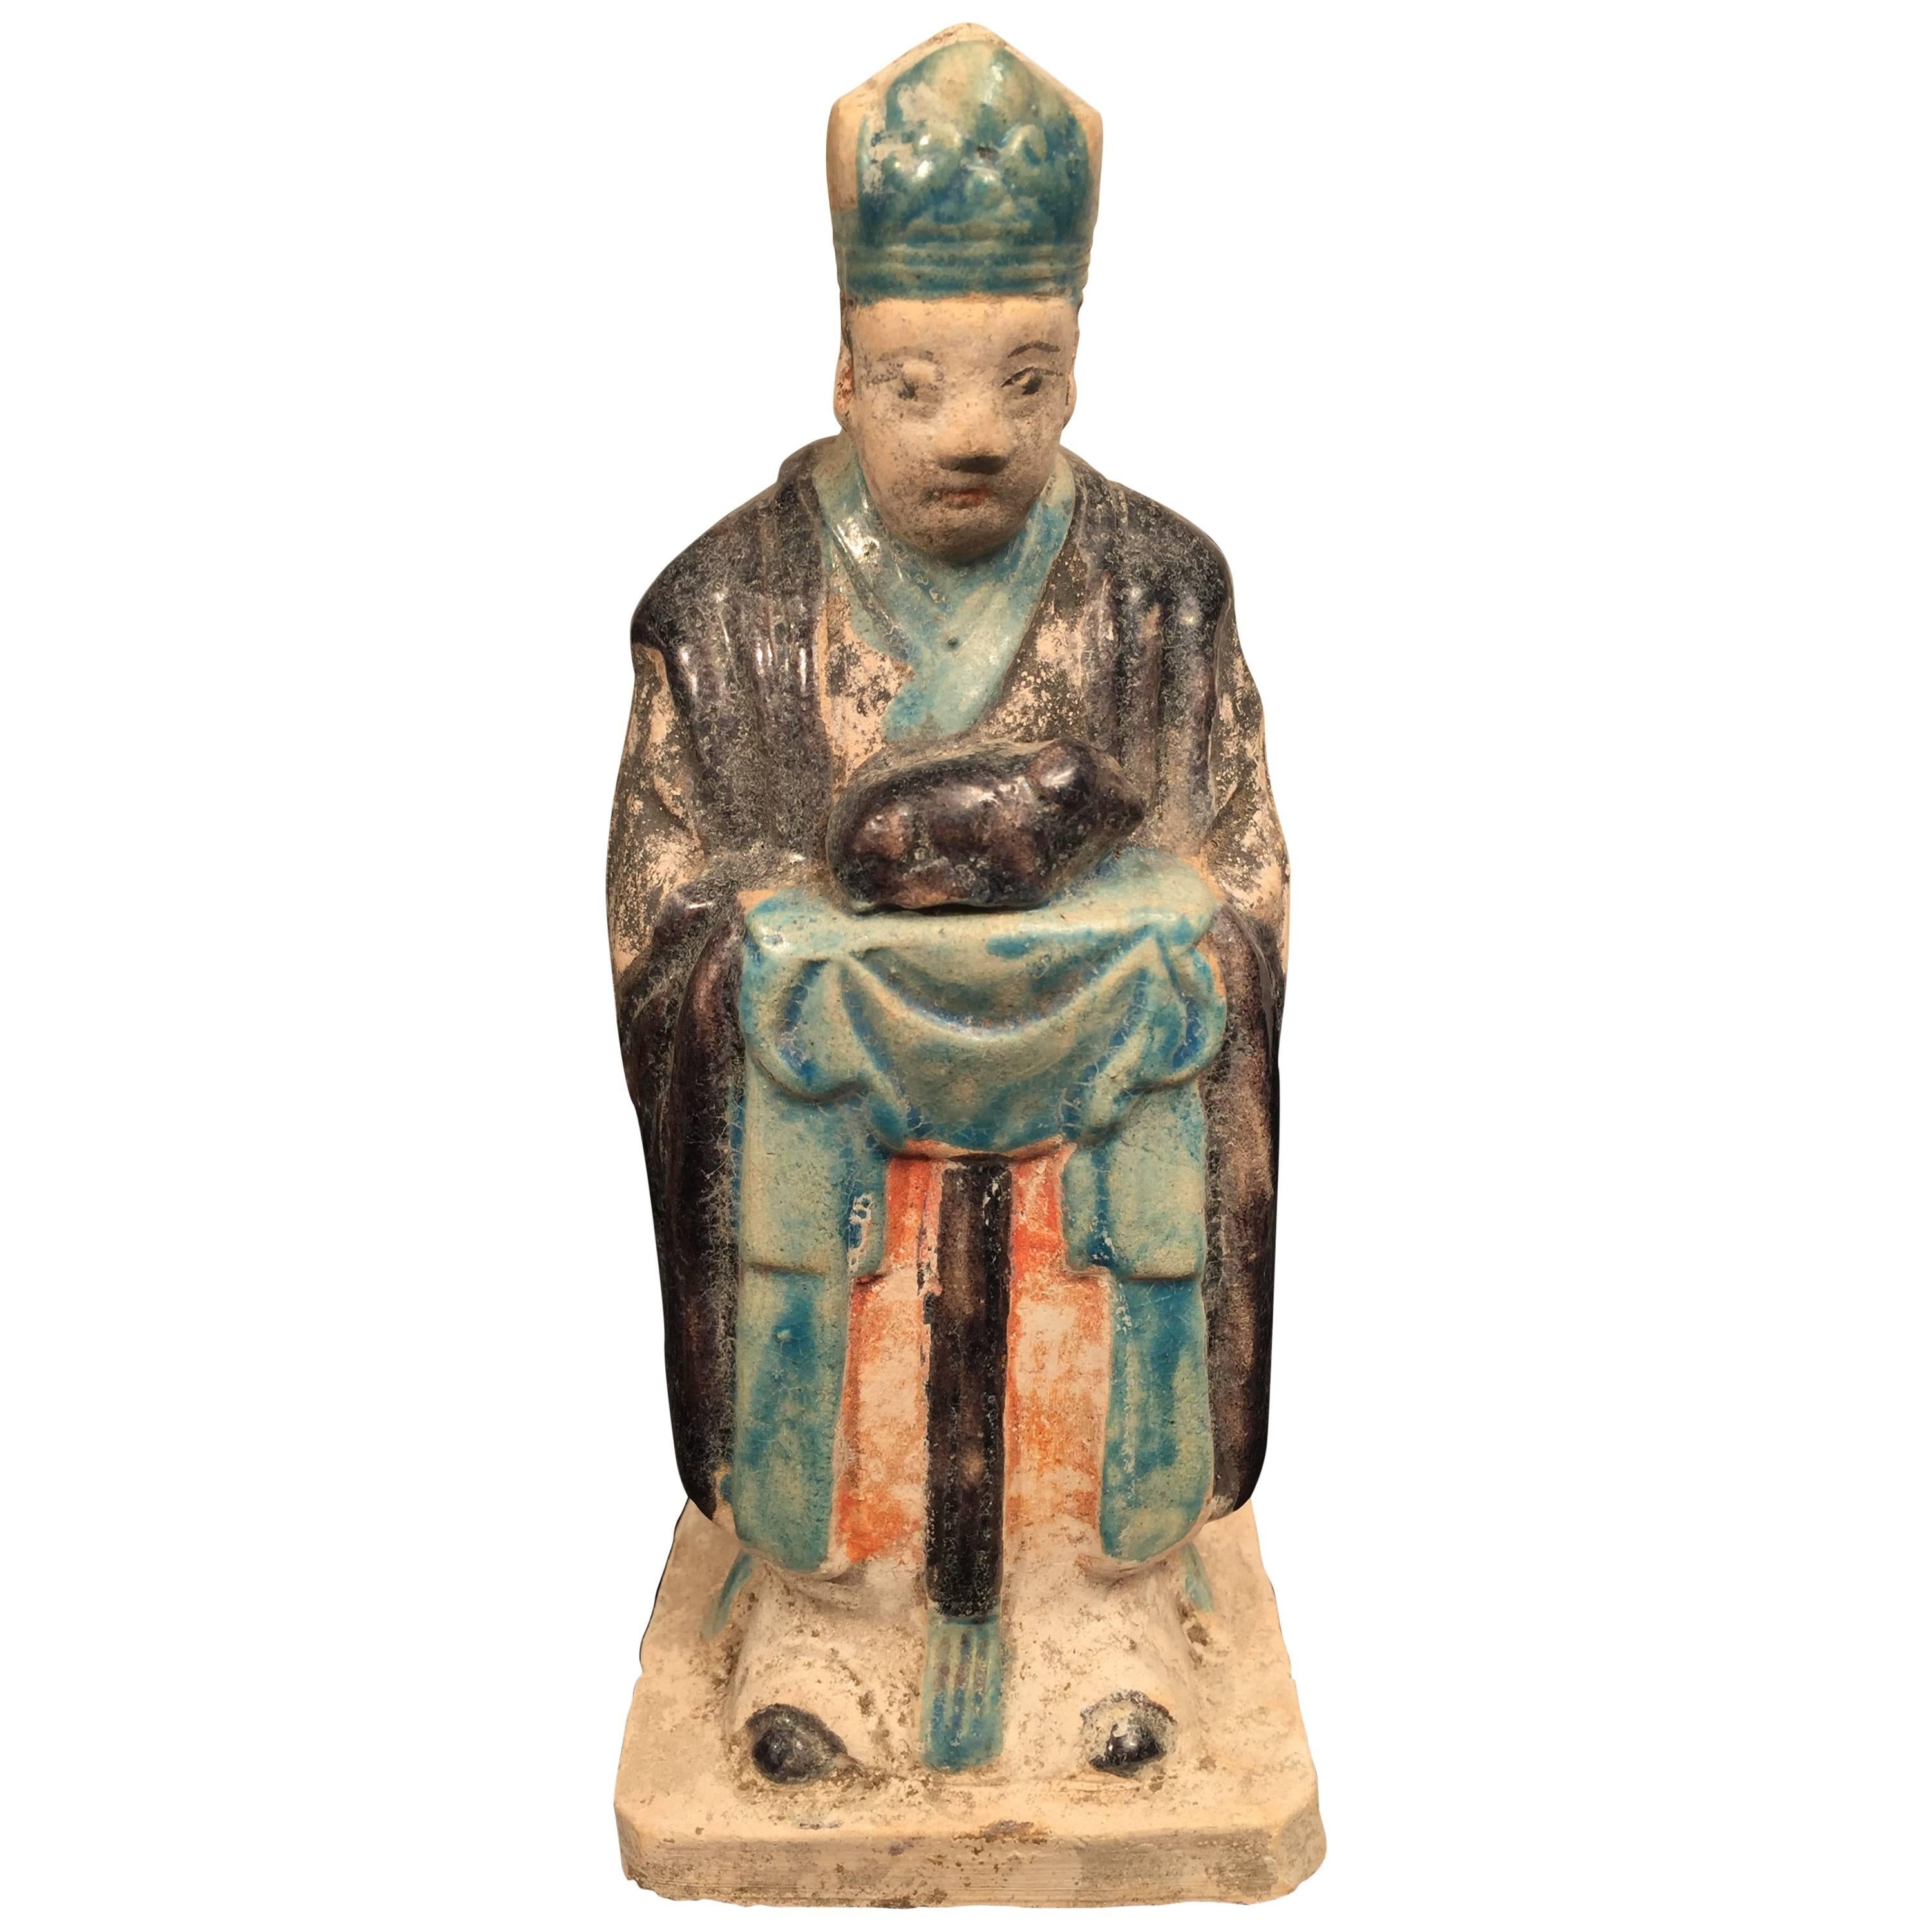 Ancient Chinese Zodiac figure holding a SHEEP Ming Dynasty, 1368-1644.

This interesting zodiac figure is one animal from the zodiac. 

The statues each hold a different animal and are dressed in long gowns with long sleeves, their hands folded in